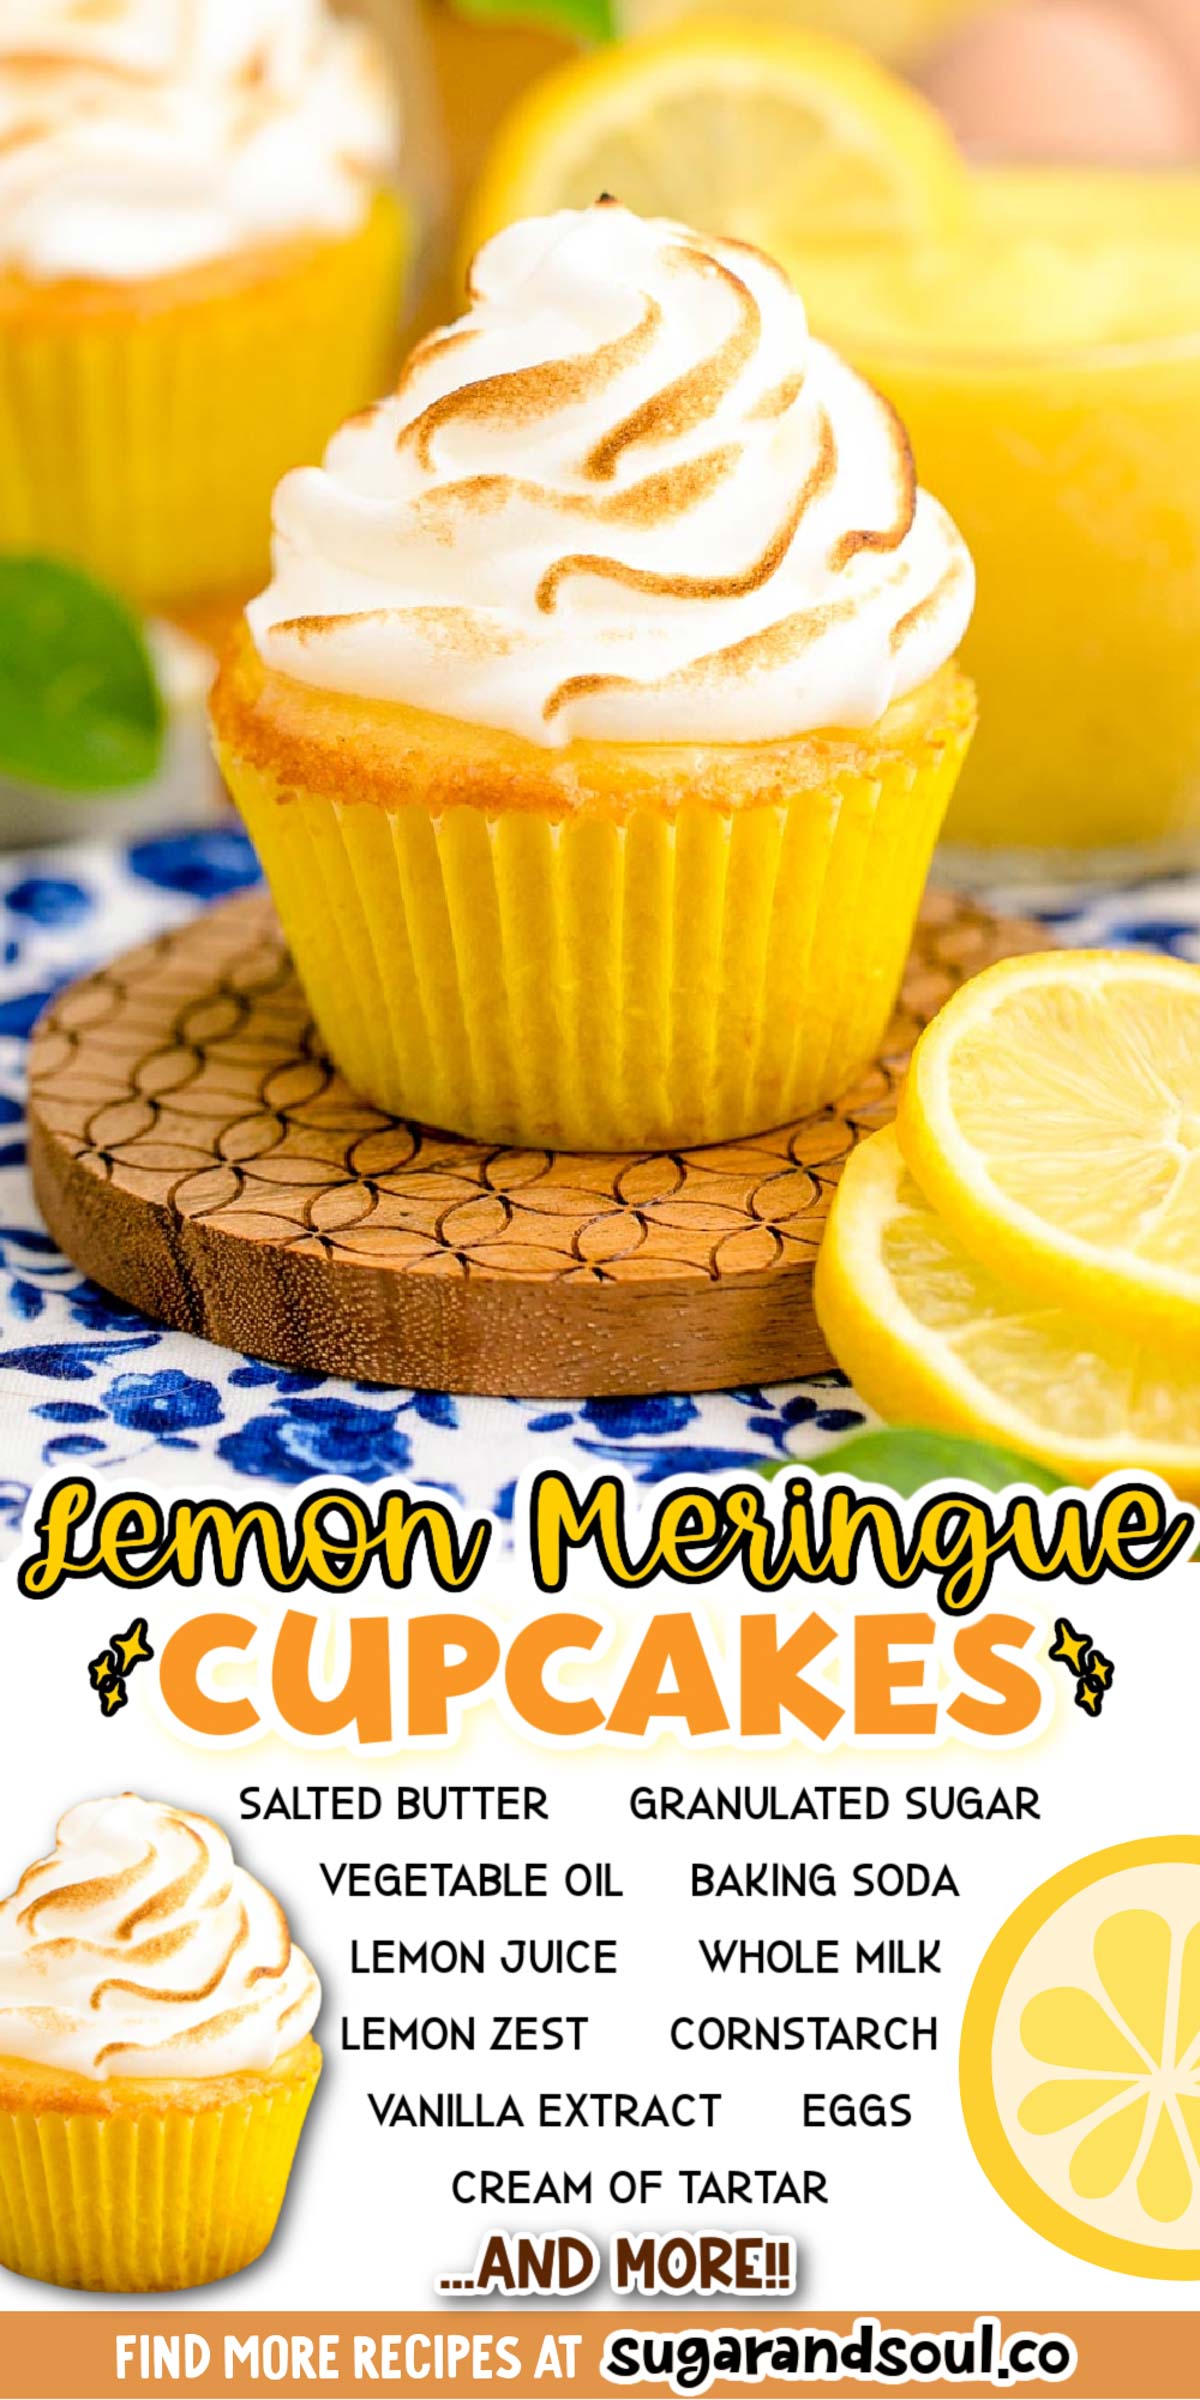 These Lemon Meringue Cupcakes have a hidden silky-smooth homemade lemon curd filling and are then topped with billowy meringue frosting! This delicious dessert recipe takes just 30 minutes to prep! via @sugarandsoulco